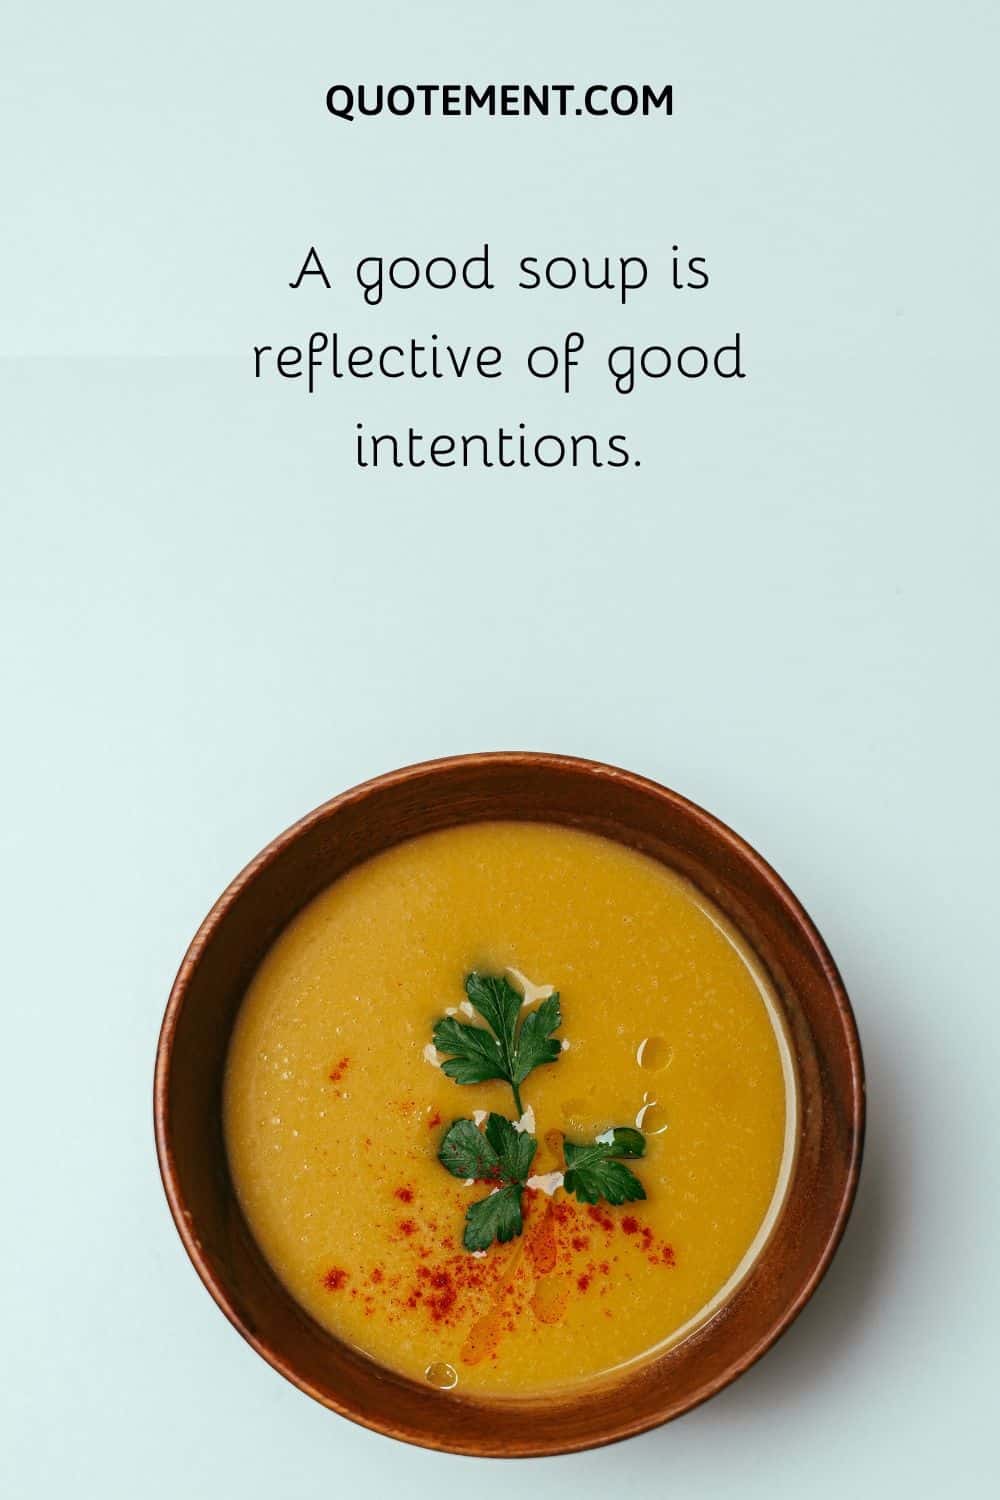 A good soup is reflective of good intentions